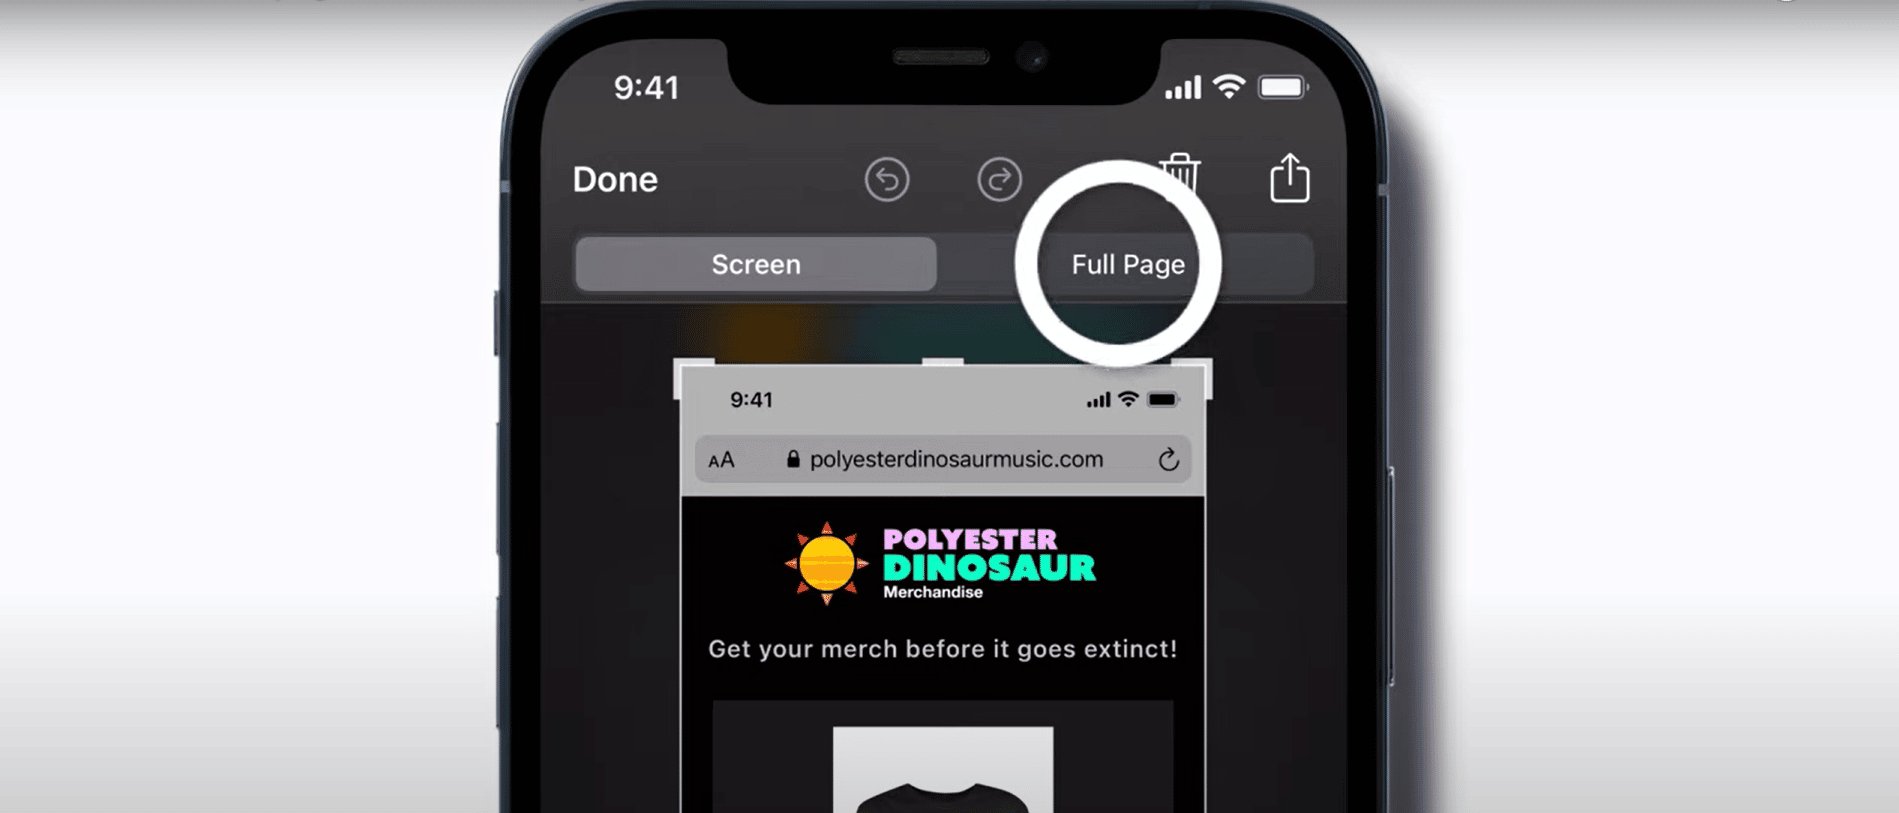 How to Take Full-Page Screenshots on iPhone | CellularNews